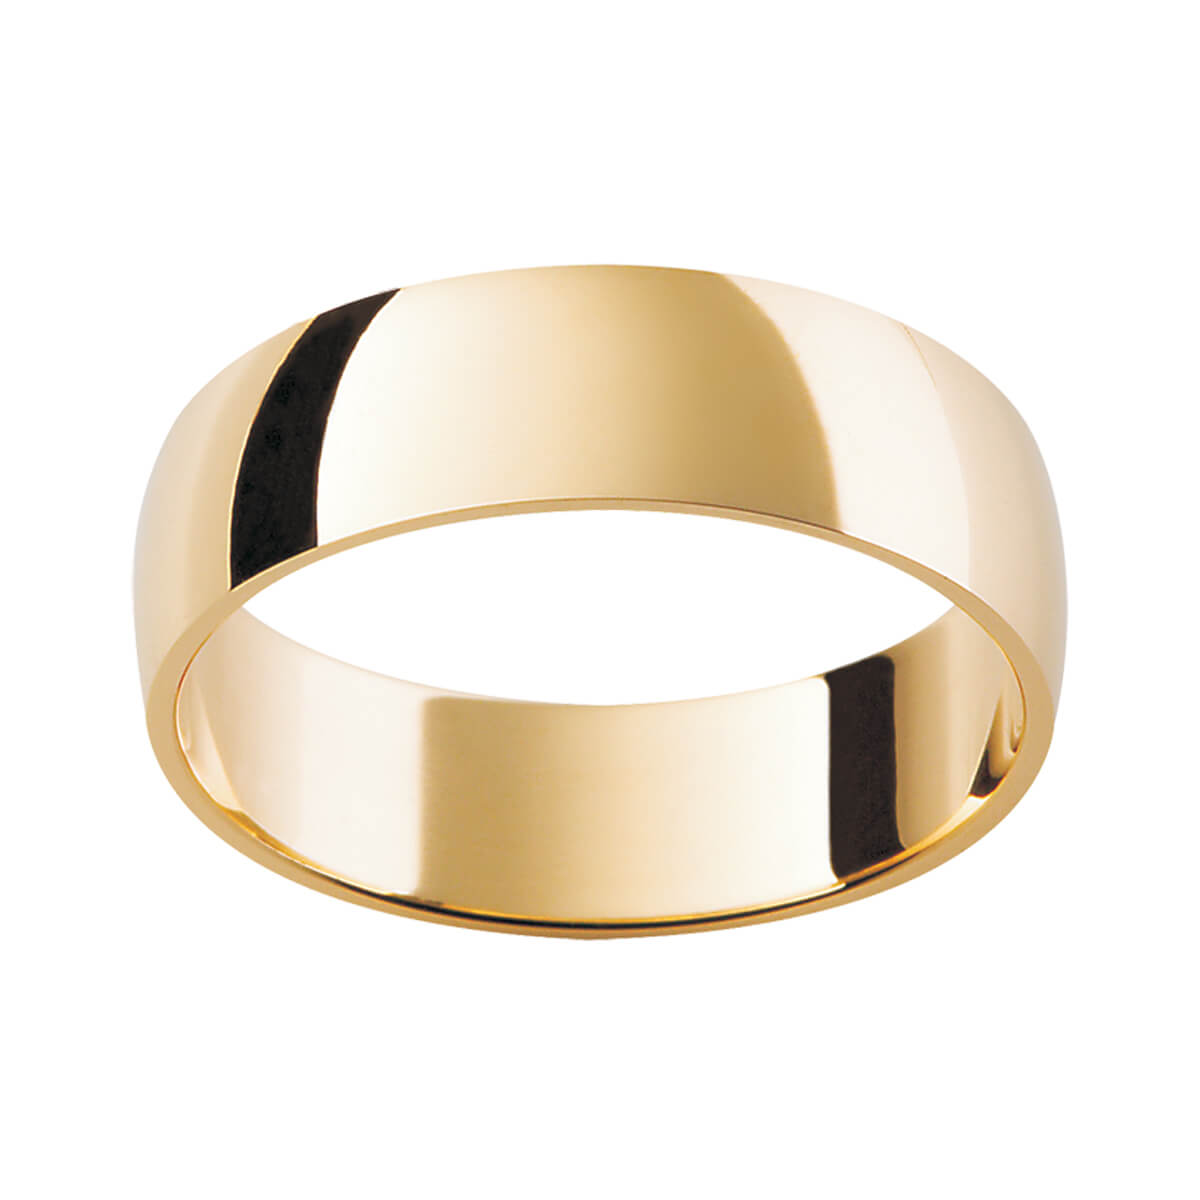 LHR wedding band with semi-rounded profile